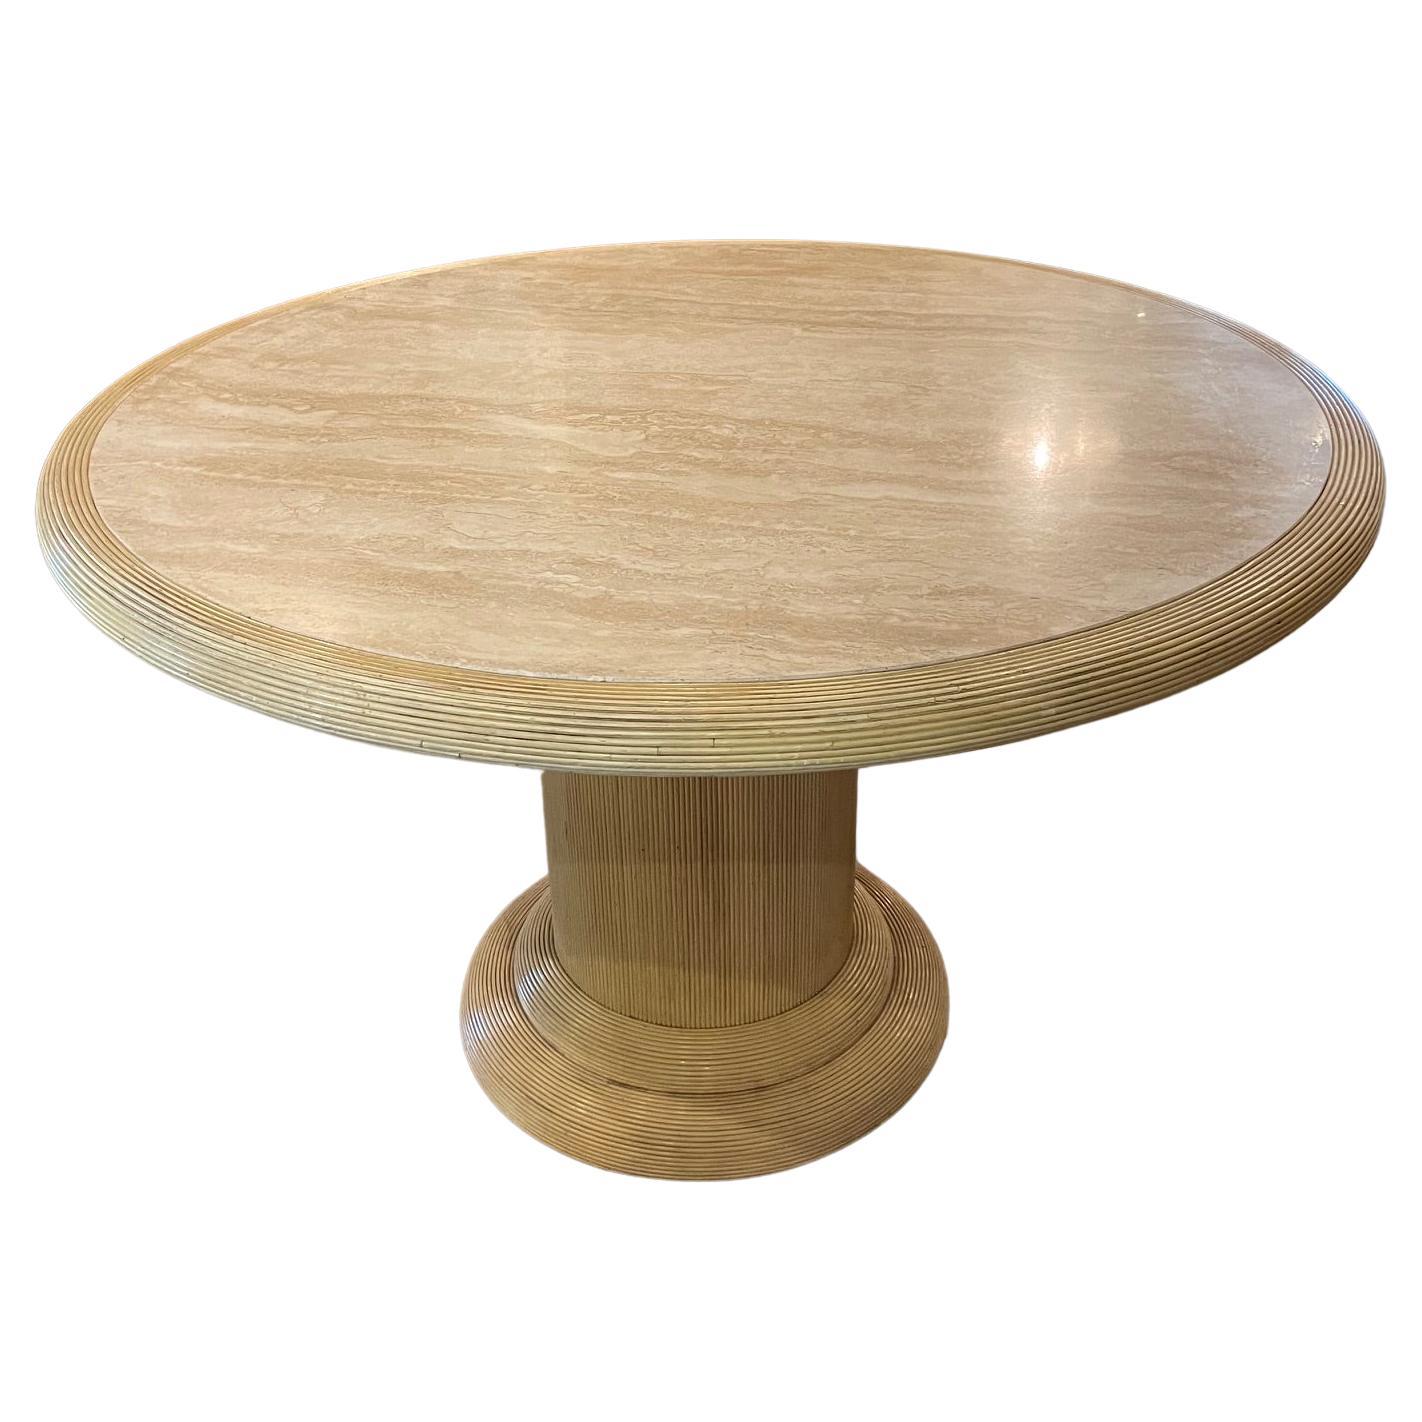 Round Travertine And Rattan Dining Table, Italy, 1970's  For Sale